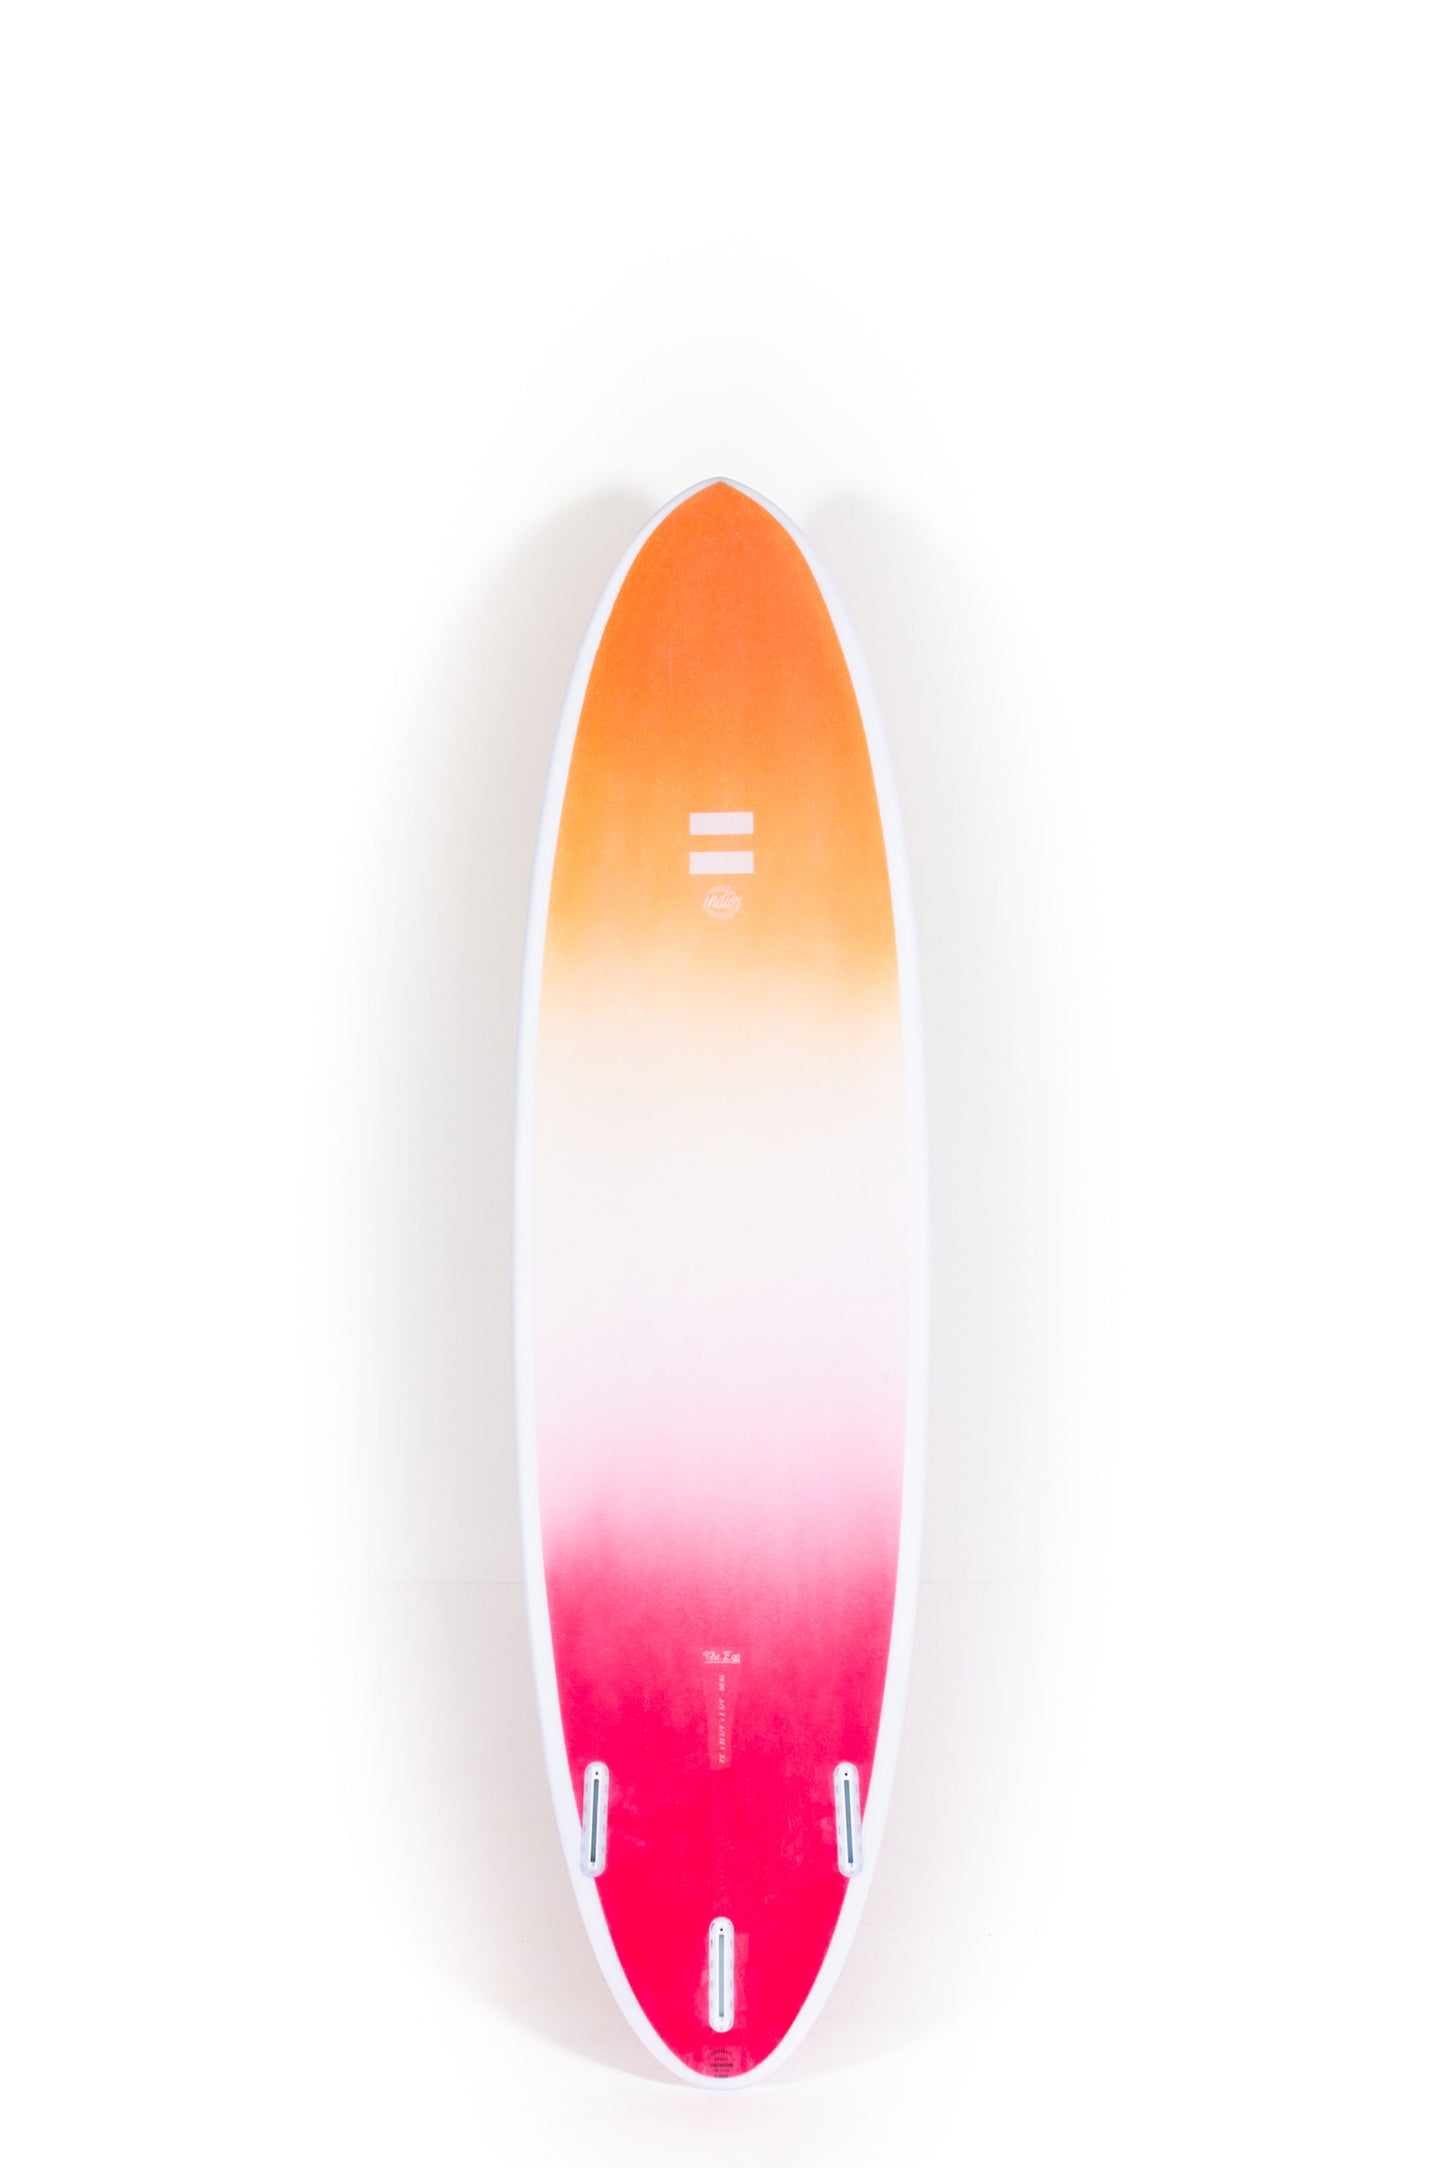 Pukas Surf Shop - Indio Surfboards - THE EGG Space - 7'2" x 21 3/4 x 2 3/4 - 50,50L - TB - INECEG0702SPA